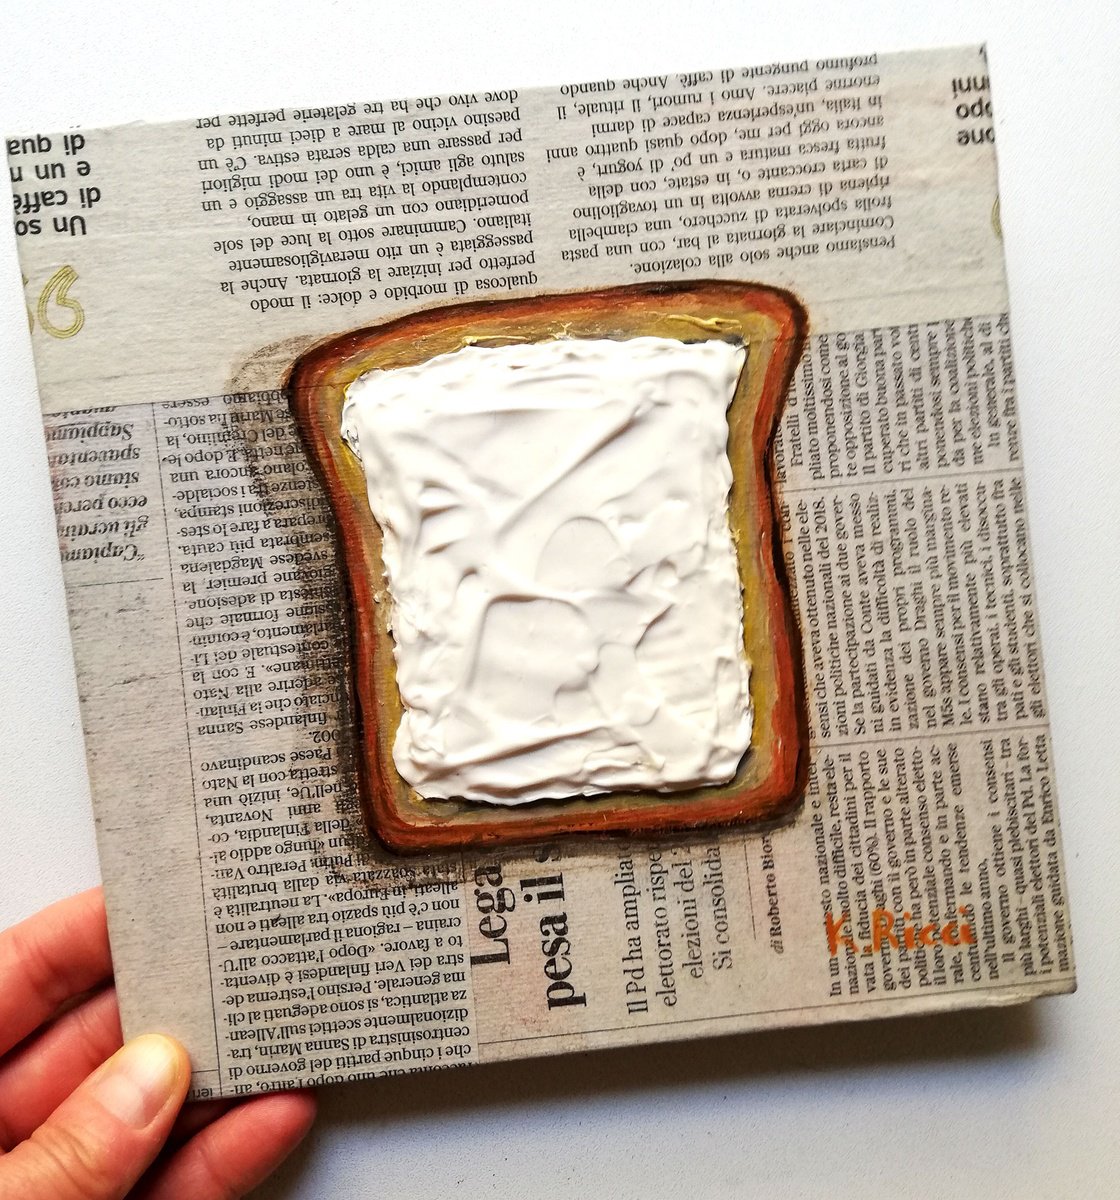 Toast with Cheese Original Acrylic on Canvas Board Painting 8 by 8 inches (20x20 cm) by Katia Ricci